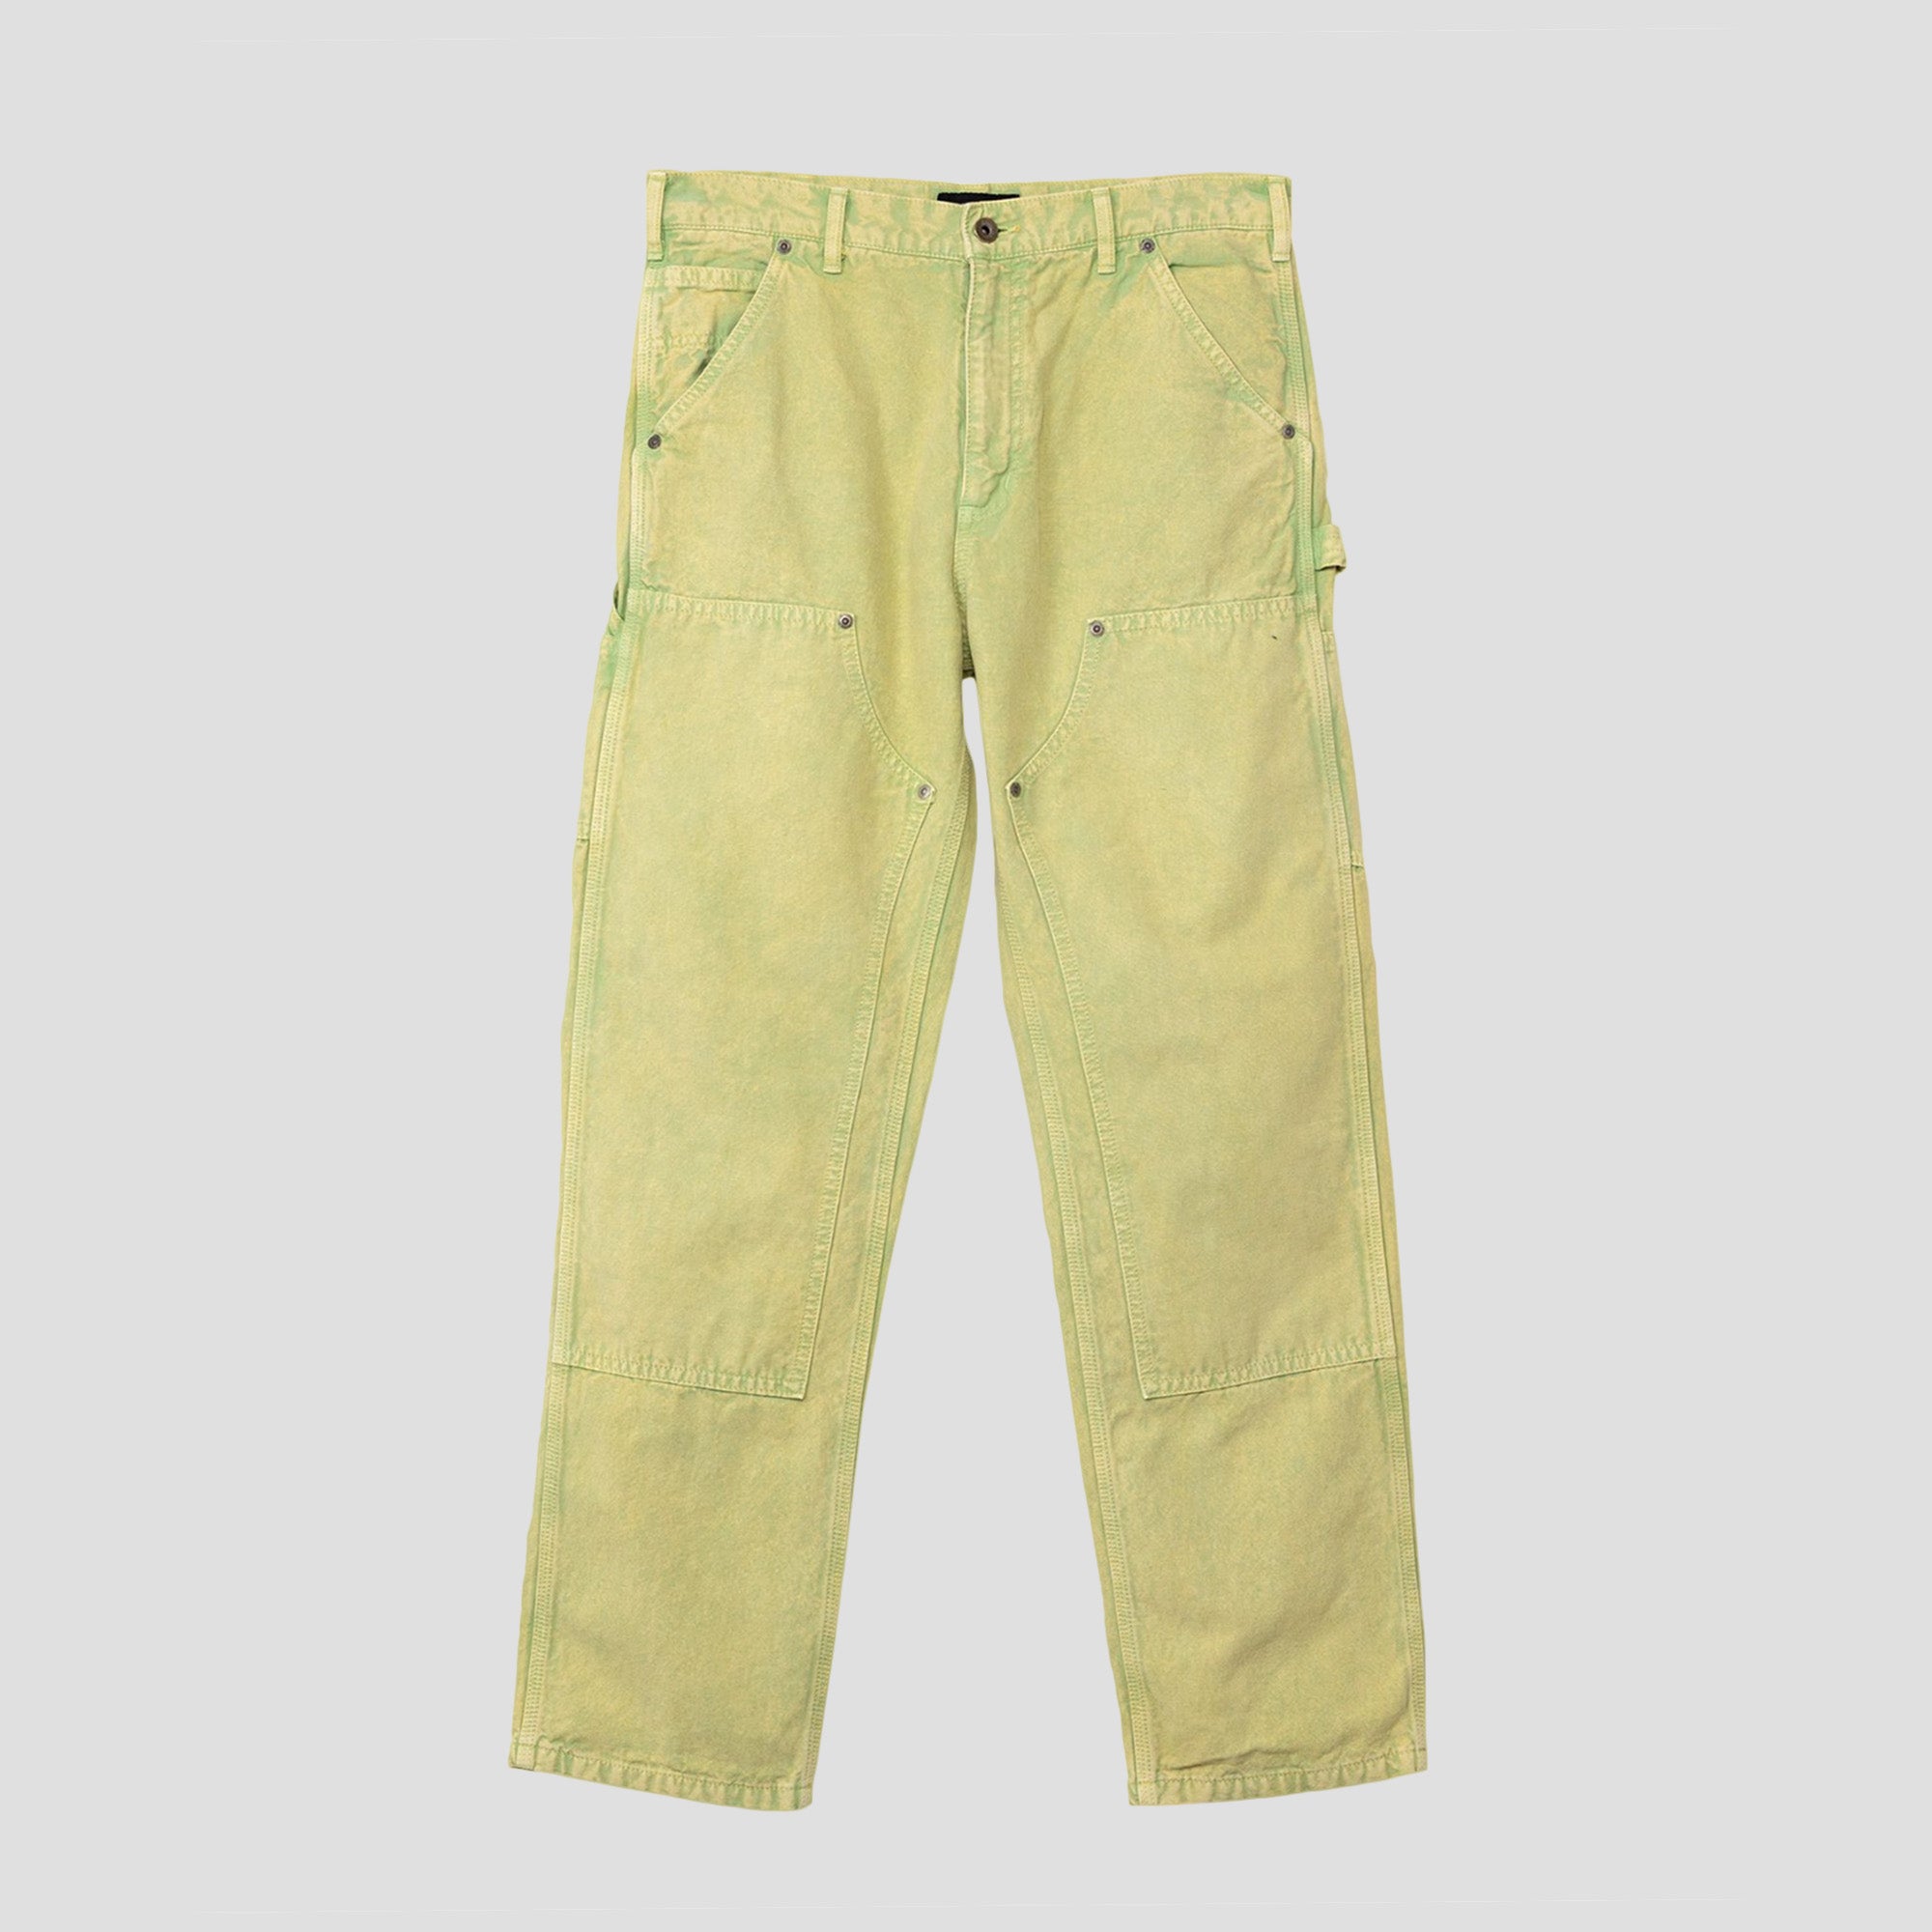 OVER DYED WORK PANTS